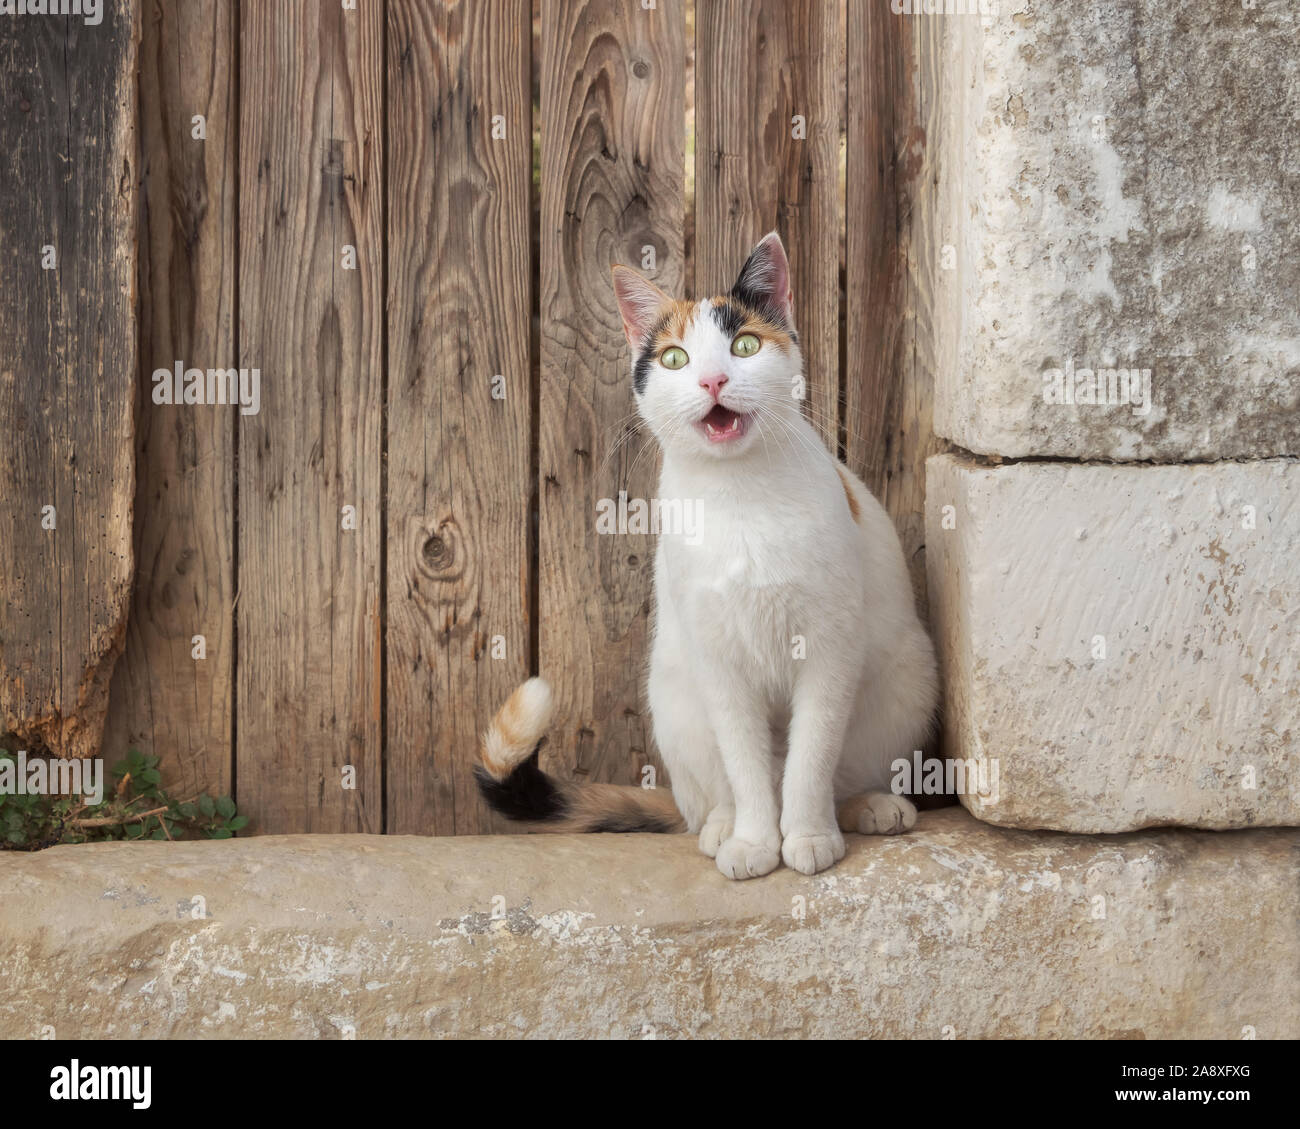 Funny cat looking with an amazed expression sitting in front of an old wooden door, the white kitty with calico color pattern is completely astonished Stock Photo